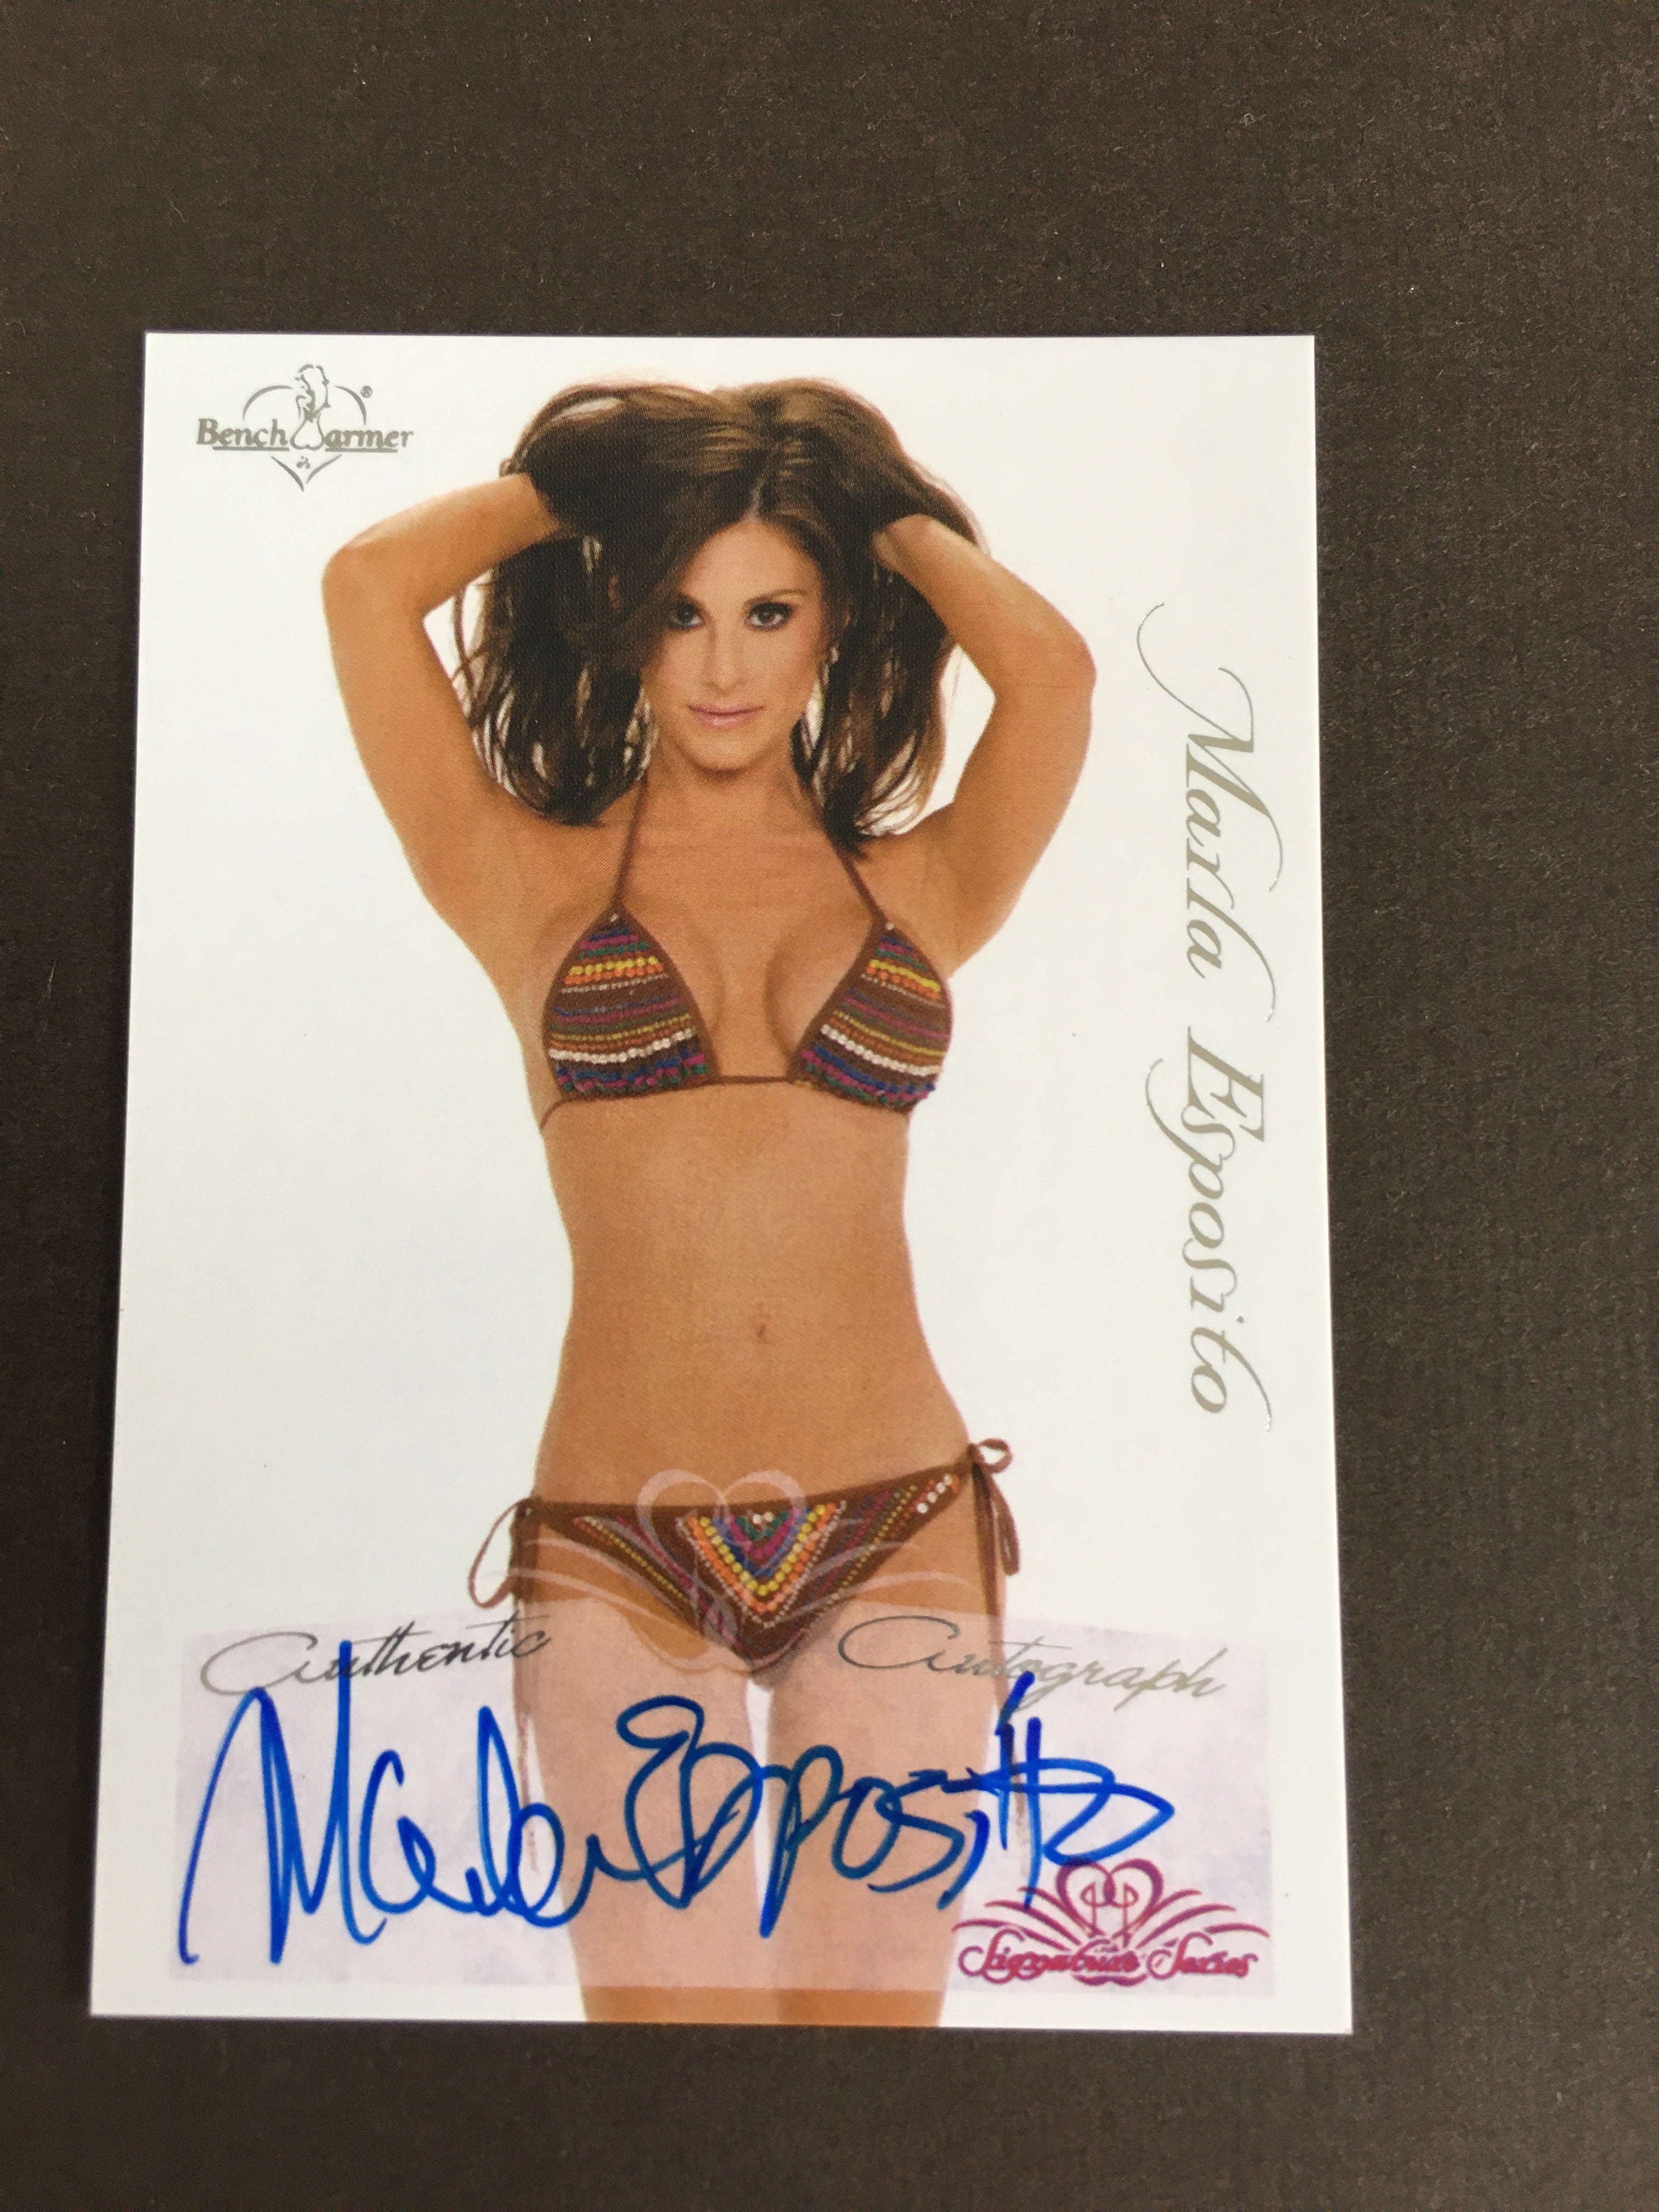 Maria Esposito - Autographed Benchwarmer Trading Card (1)